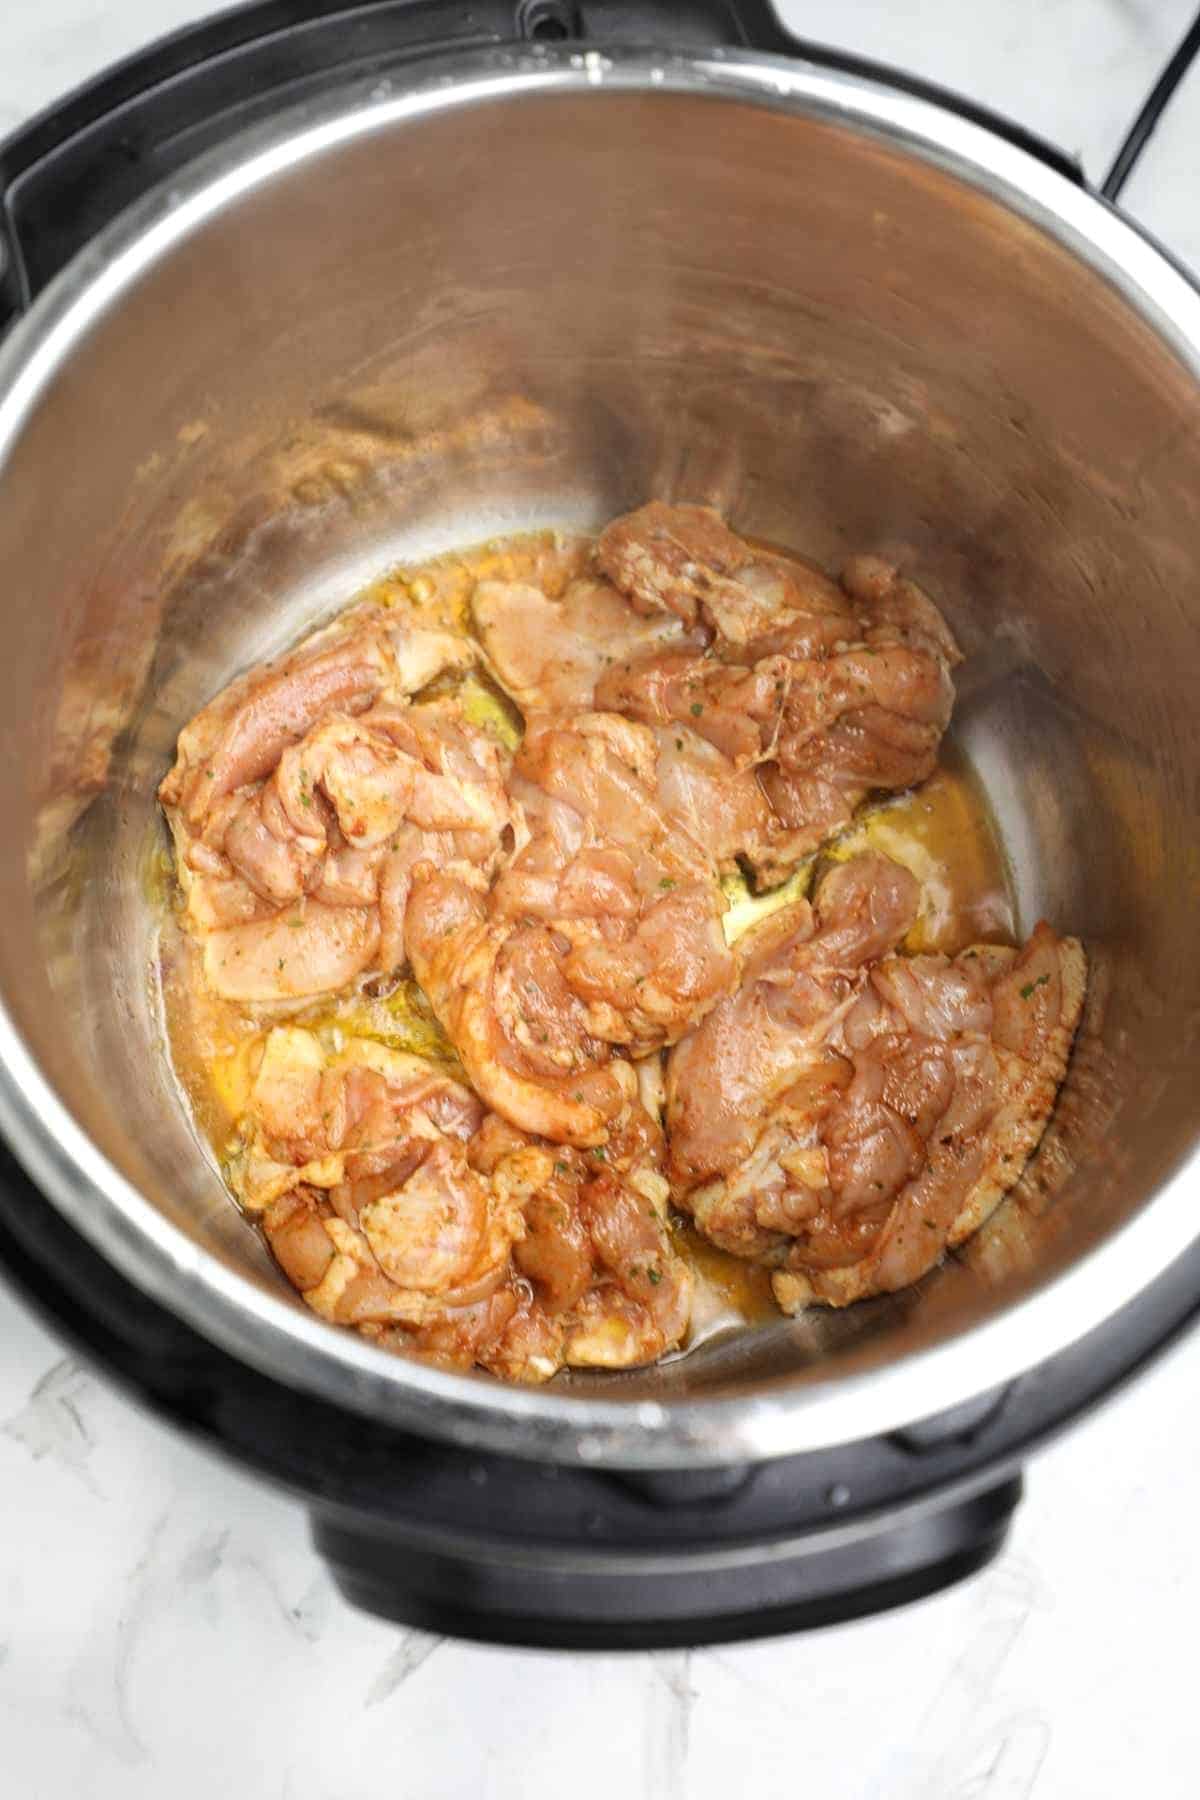 the thighs in the instant pot.